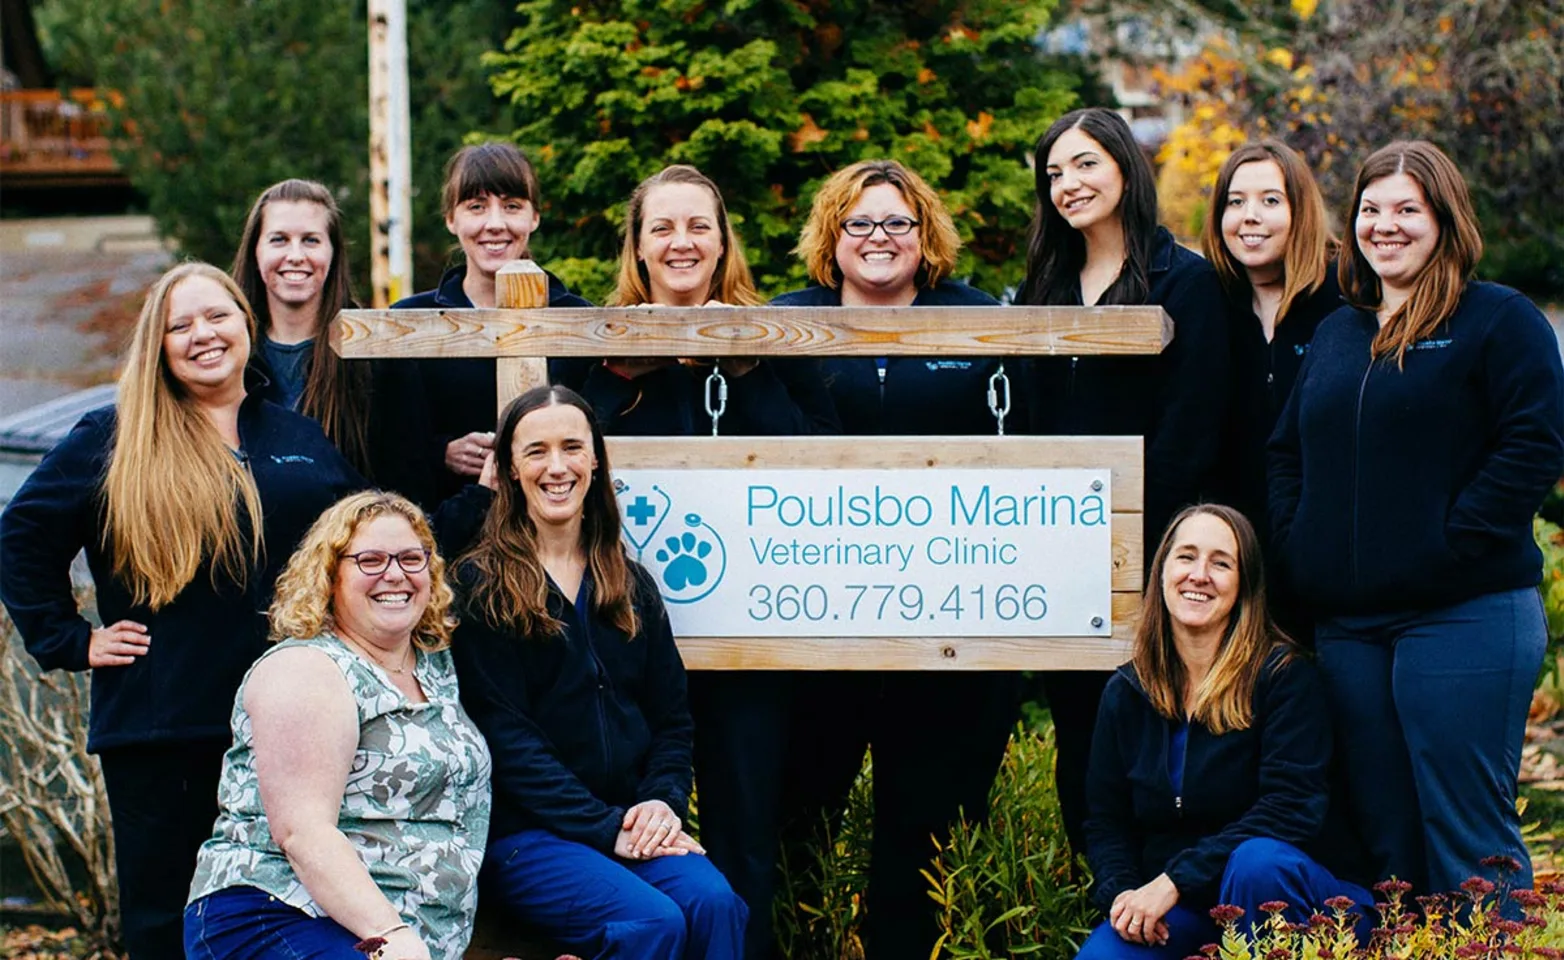 Poulsbo Marina Veterinary Clinic is posing for a group photo outside and next to their clinic's sign.  There's eleven women in the picture. 